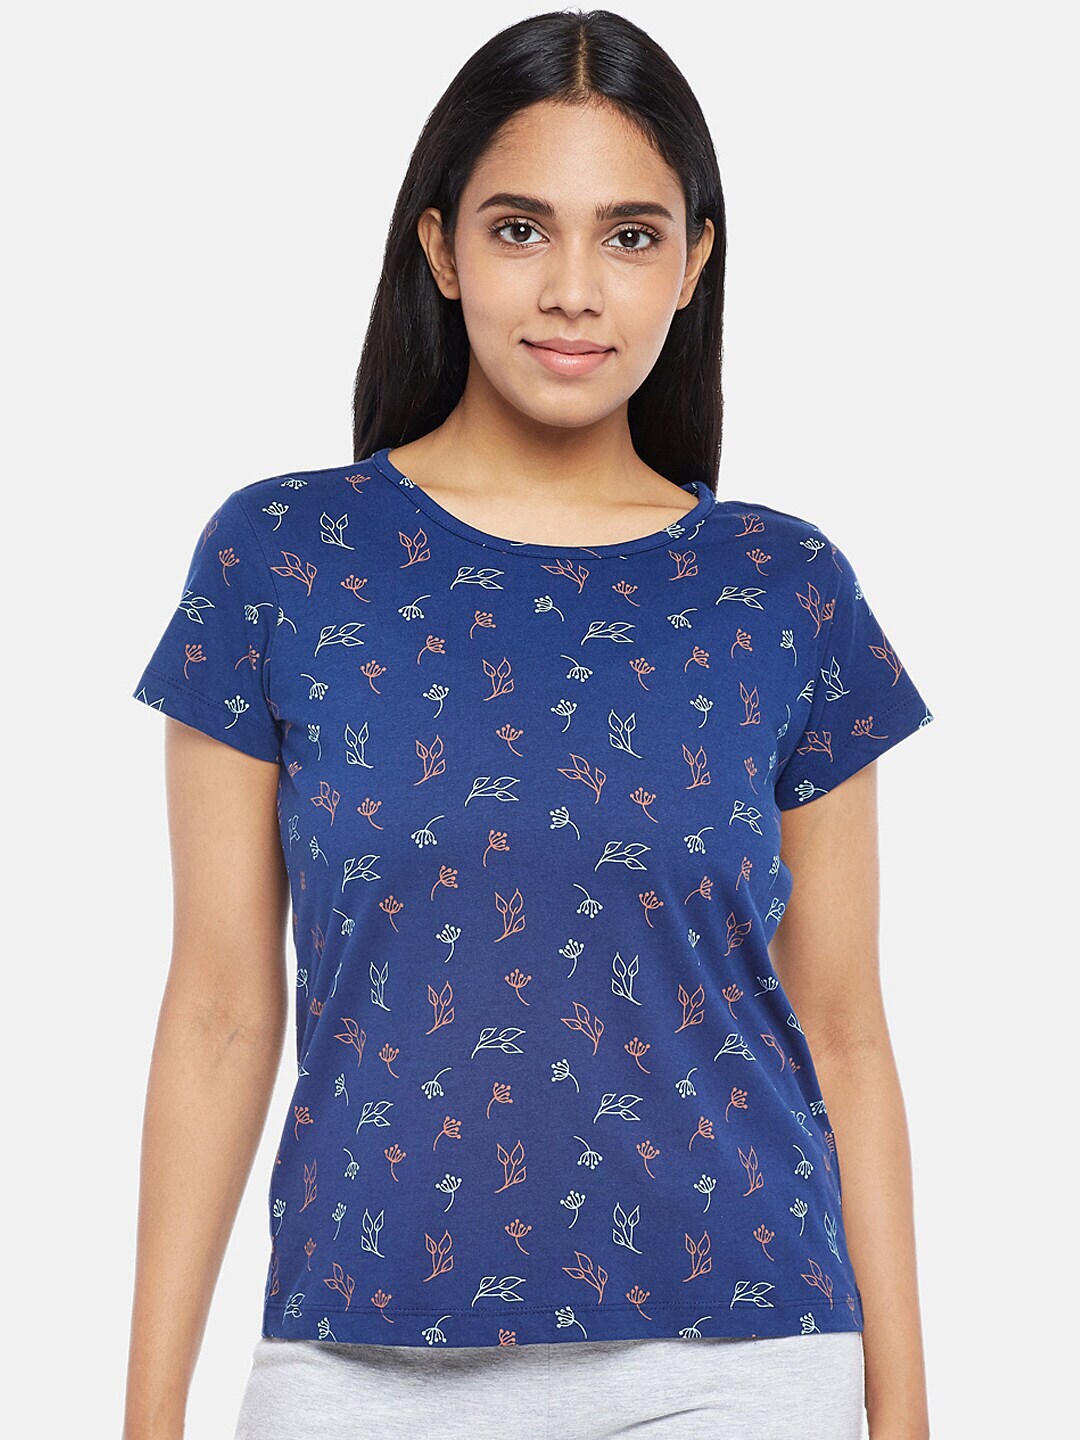 Dreamz by Pantaloons Blue & White Floral Regular Lounge tshirt Price in India